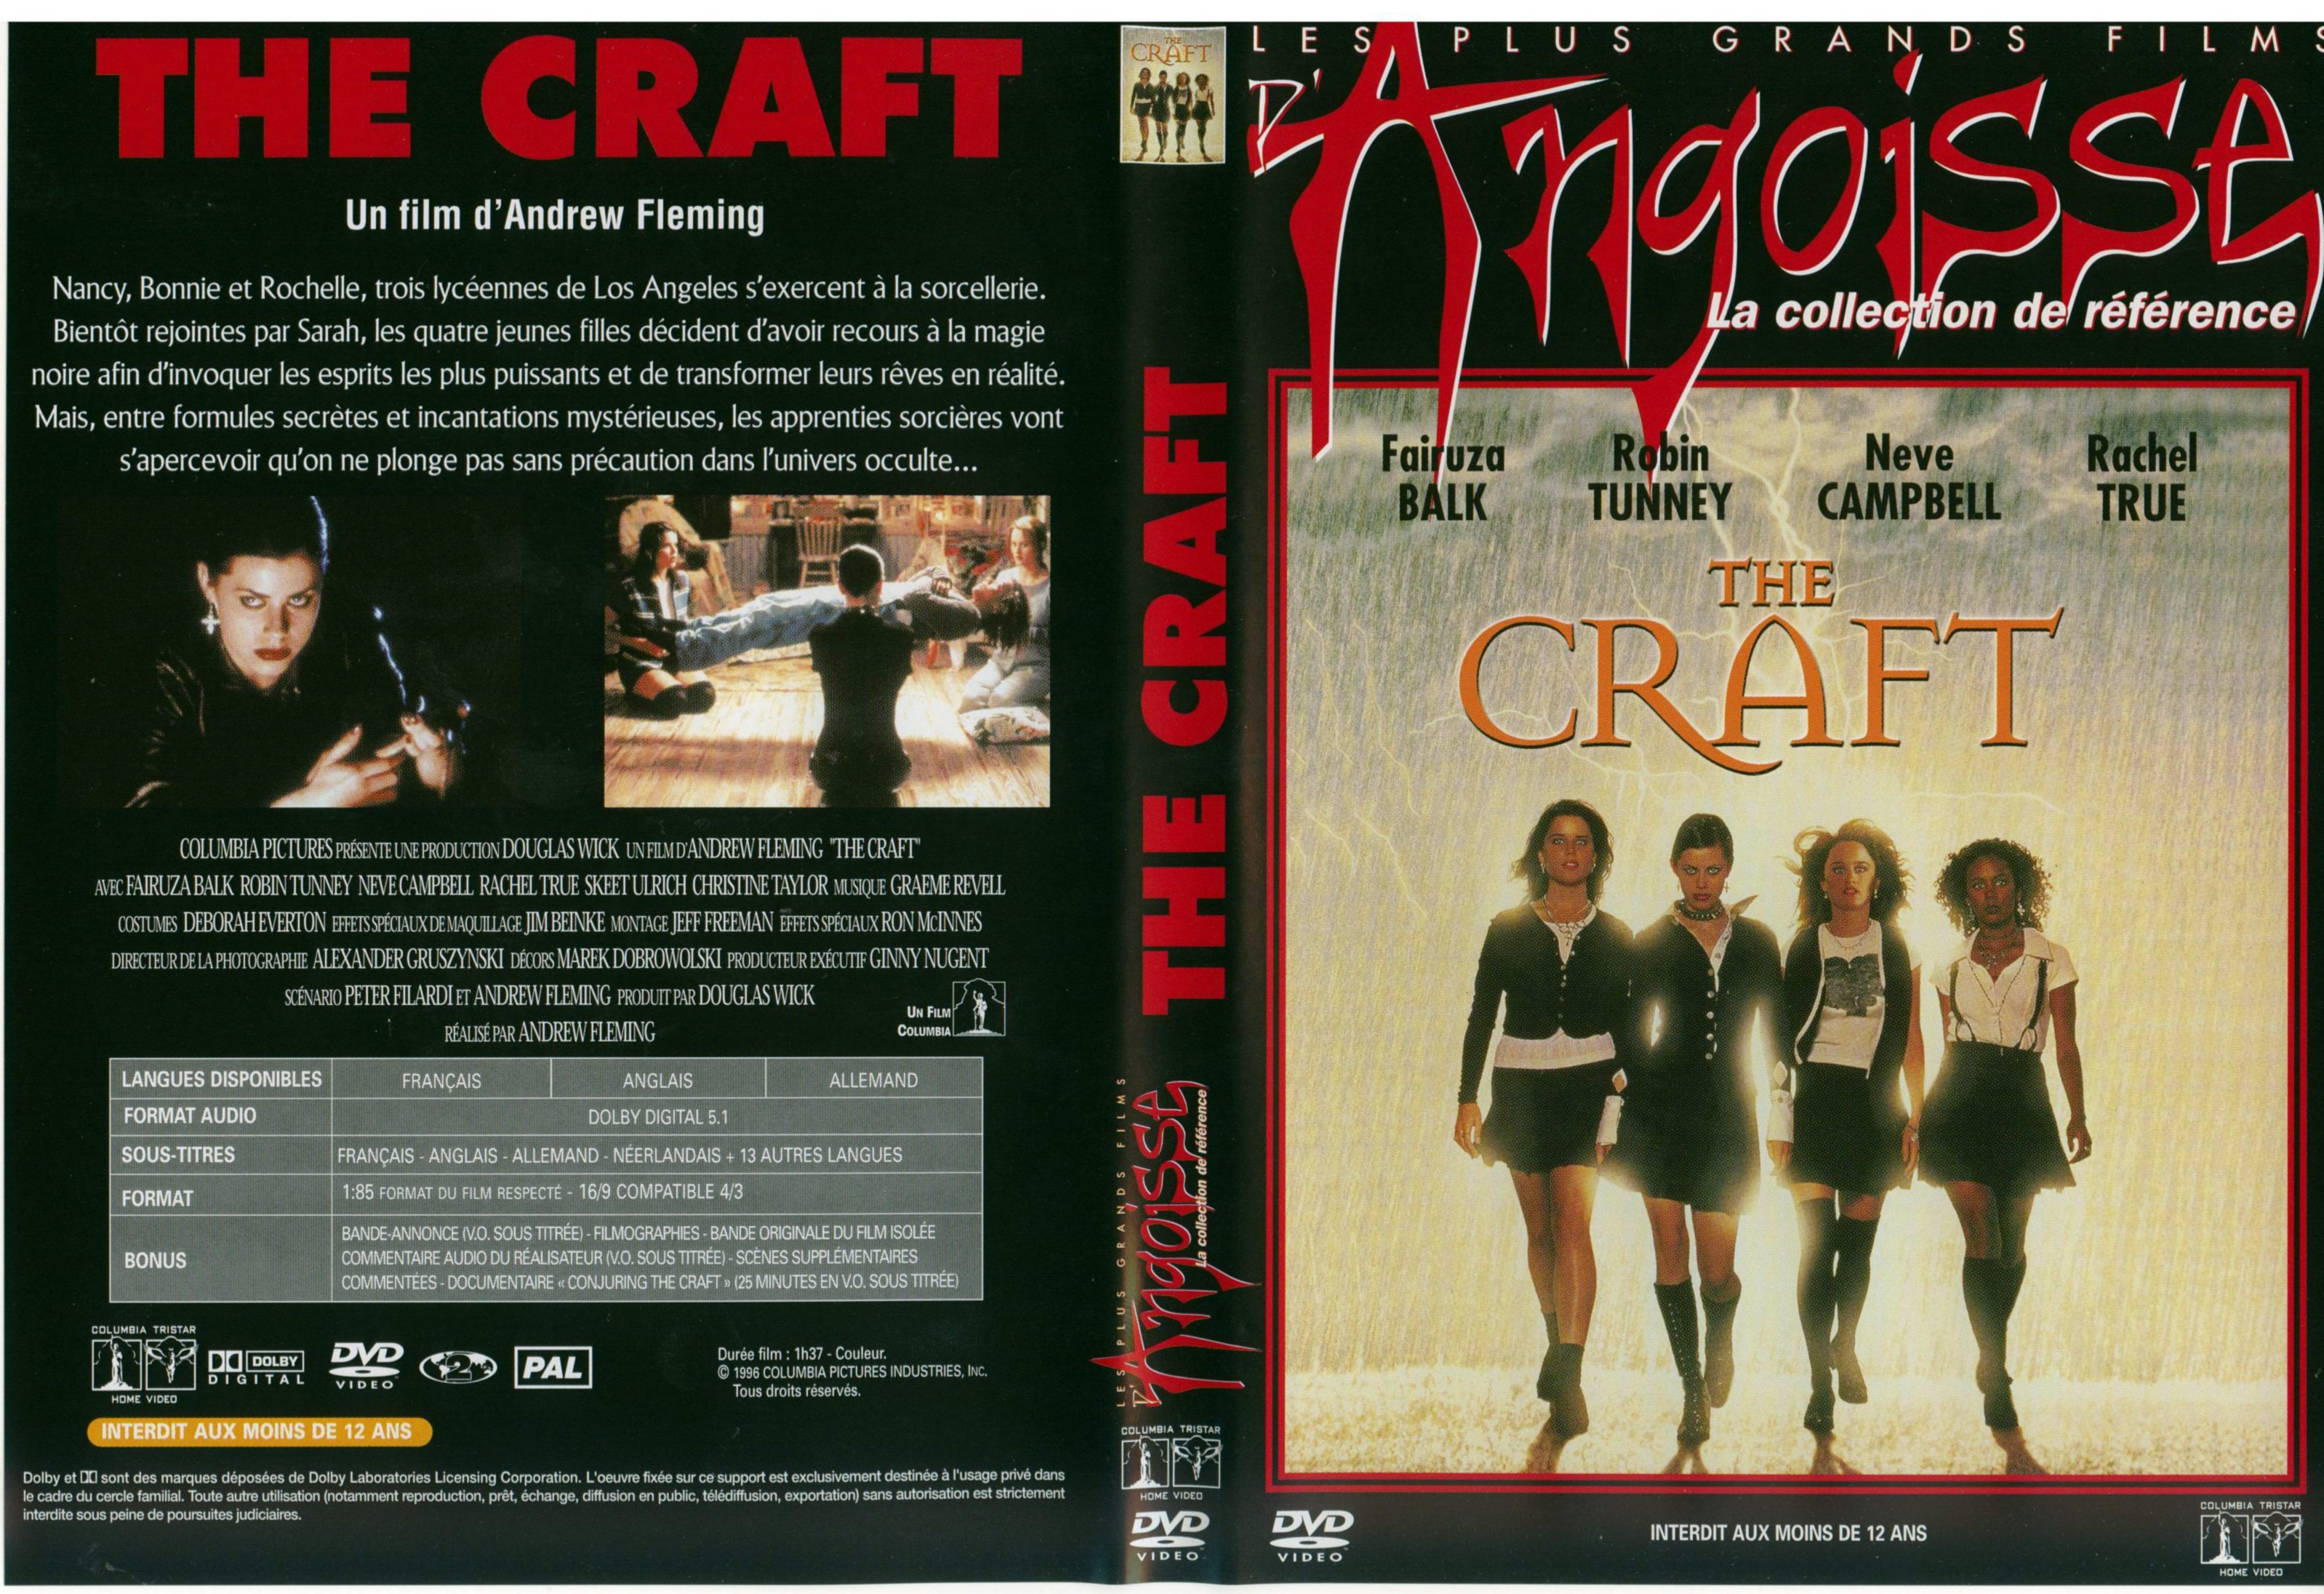 Jaquette DVD The craft v2